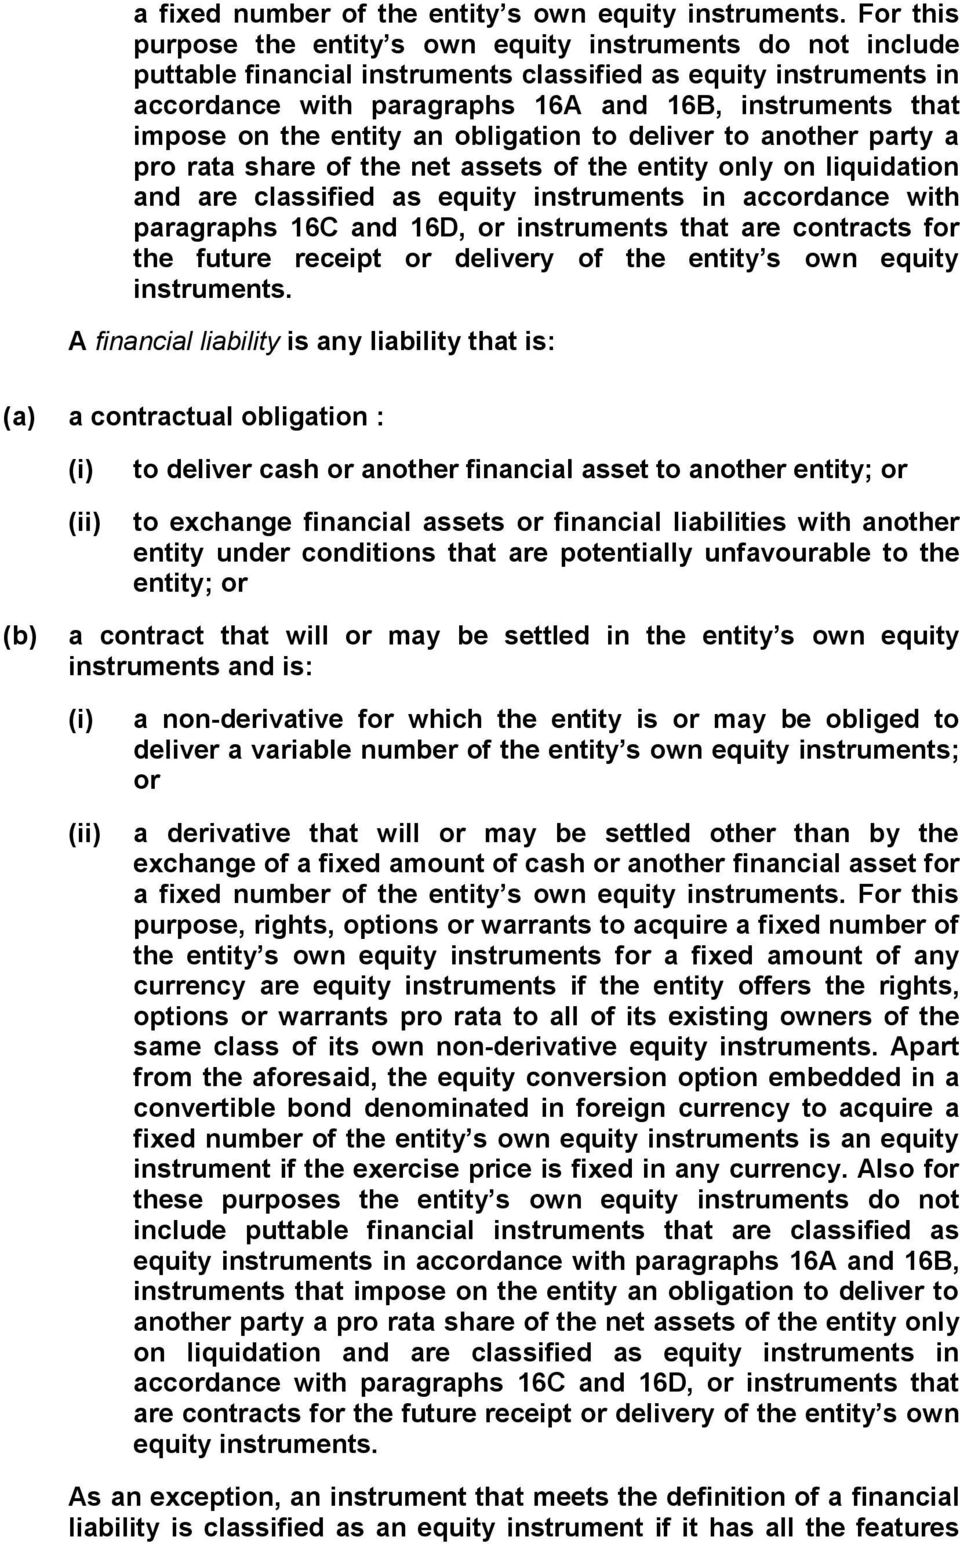 on the entity an obligation to deliver to another party a pro rata share of the net assets of the entity only on liquidation and are classified as equity instruments in accordance with paragraphs 16C